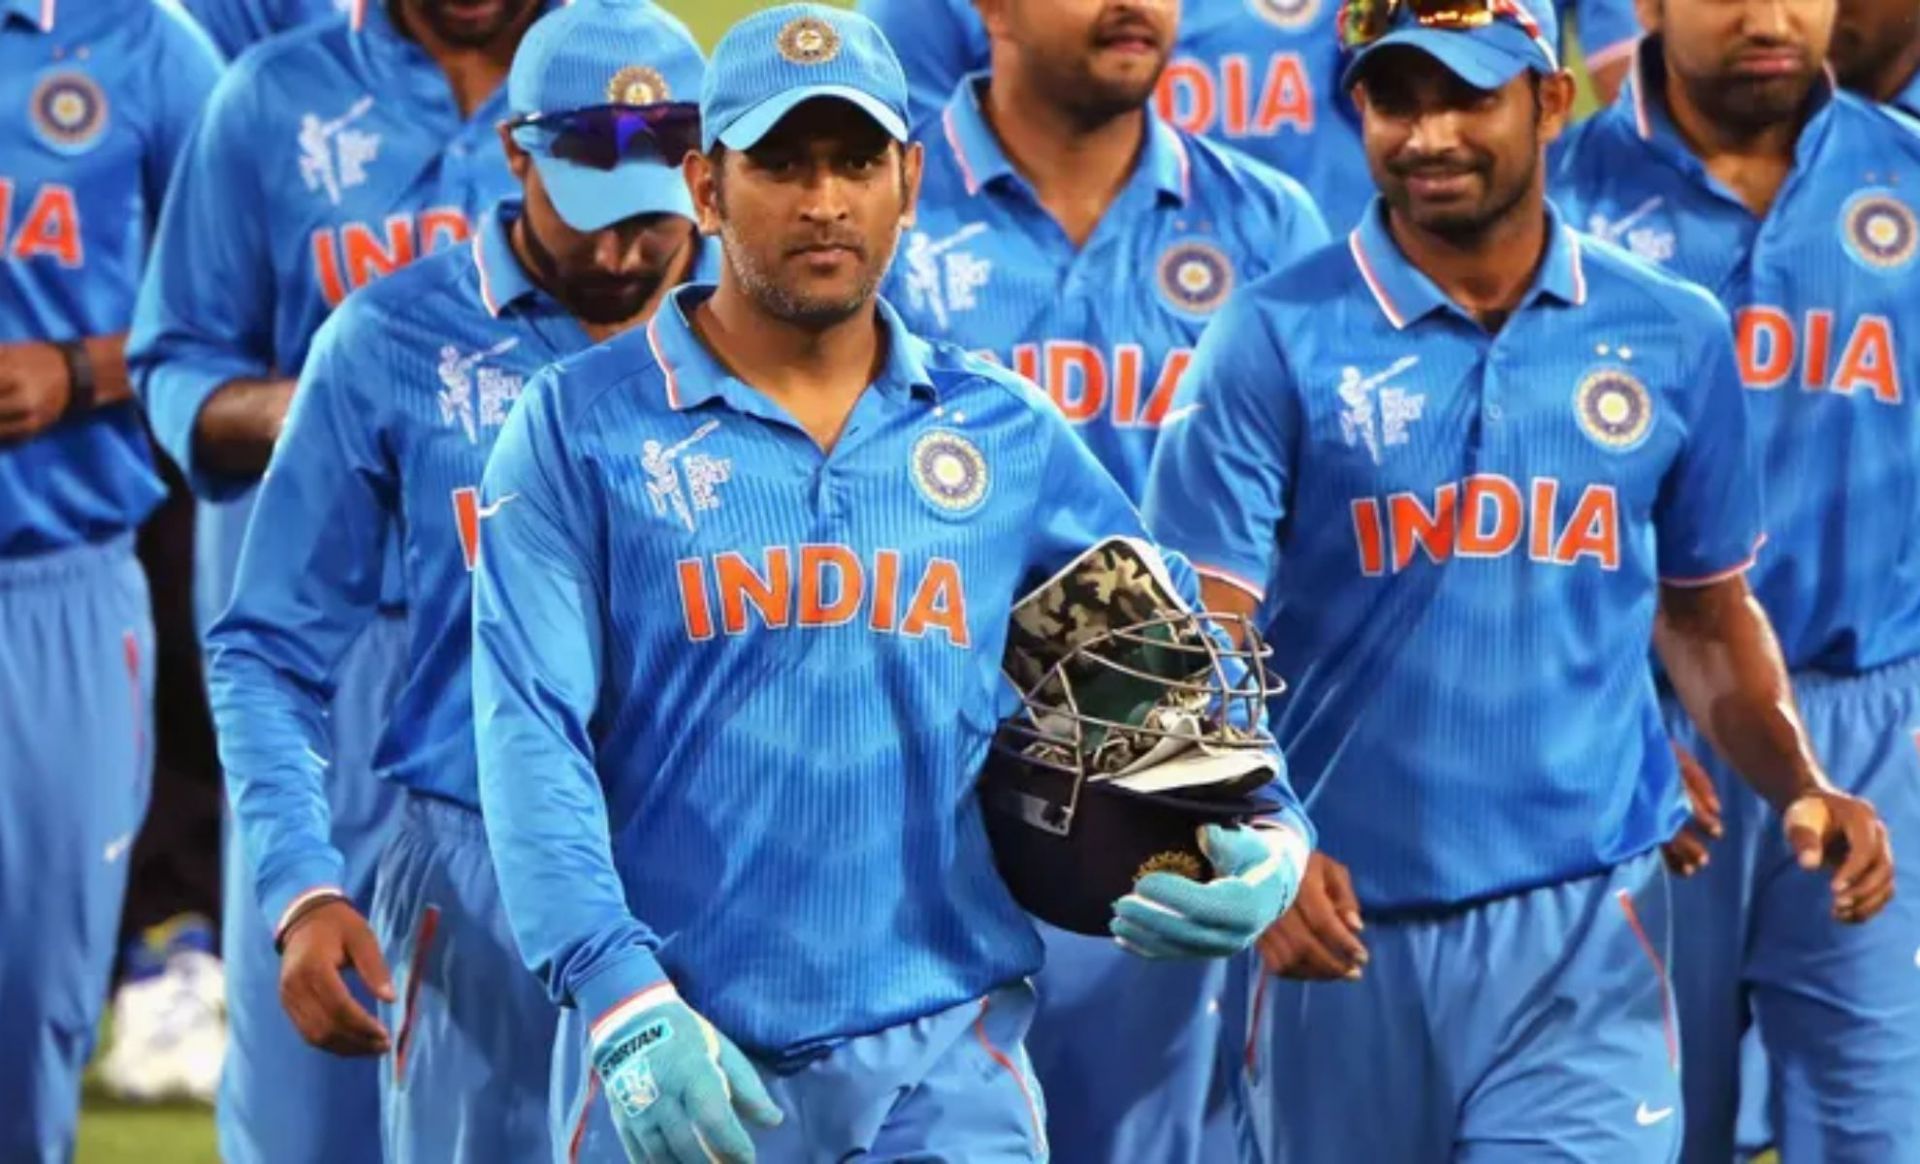 Indian cricket team at the 2015 World Cup.